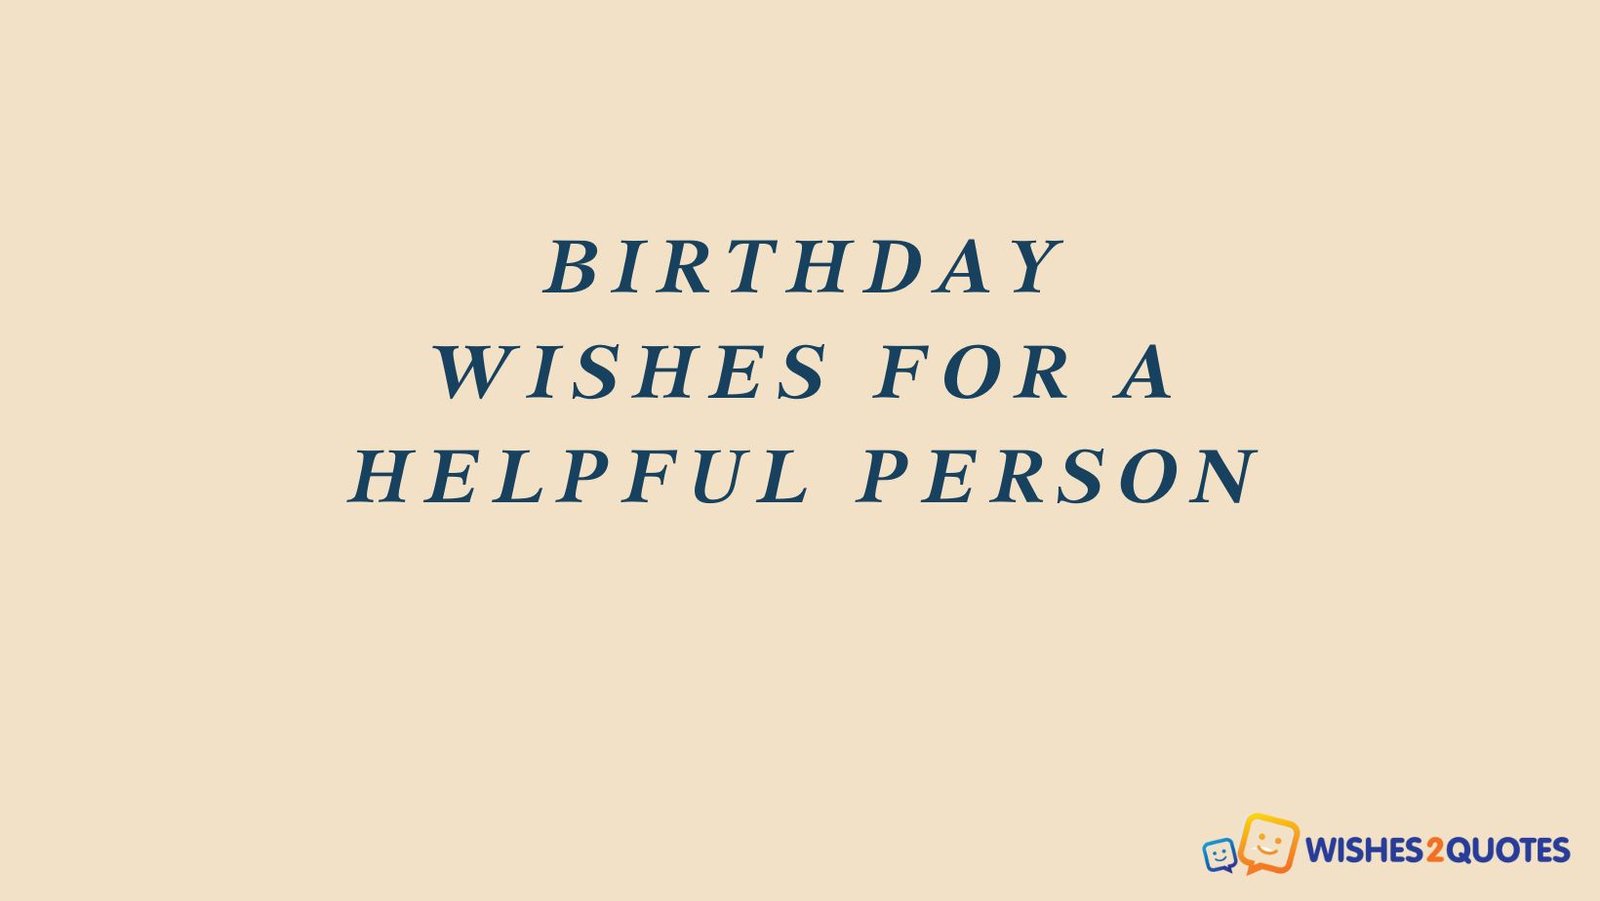 Birthday Wishes to A Helpful Person